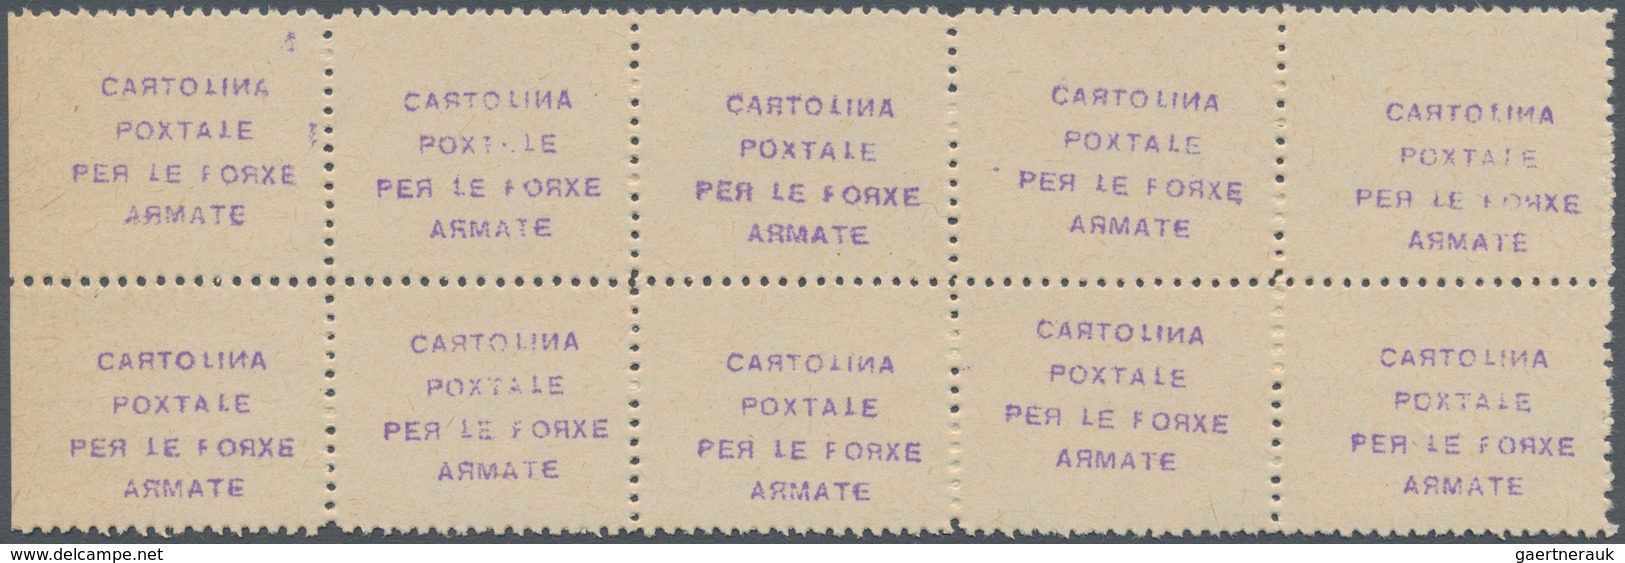 01055 Italien - Besonderheiten: 1941, Postage Free Labels For Postcards: Printed In Violet On Yellowish Pa - Non Classés